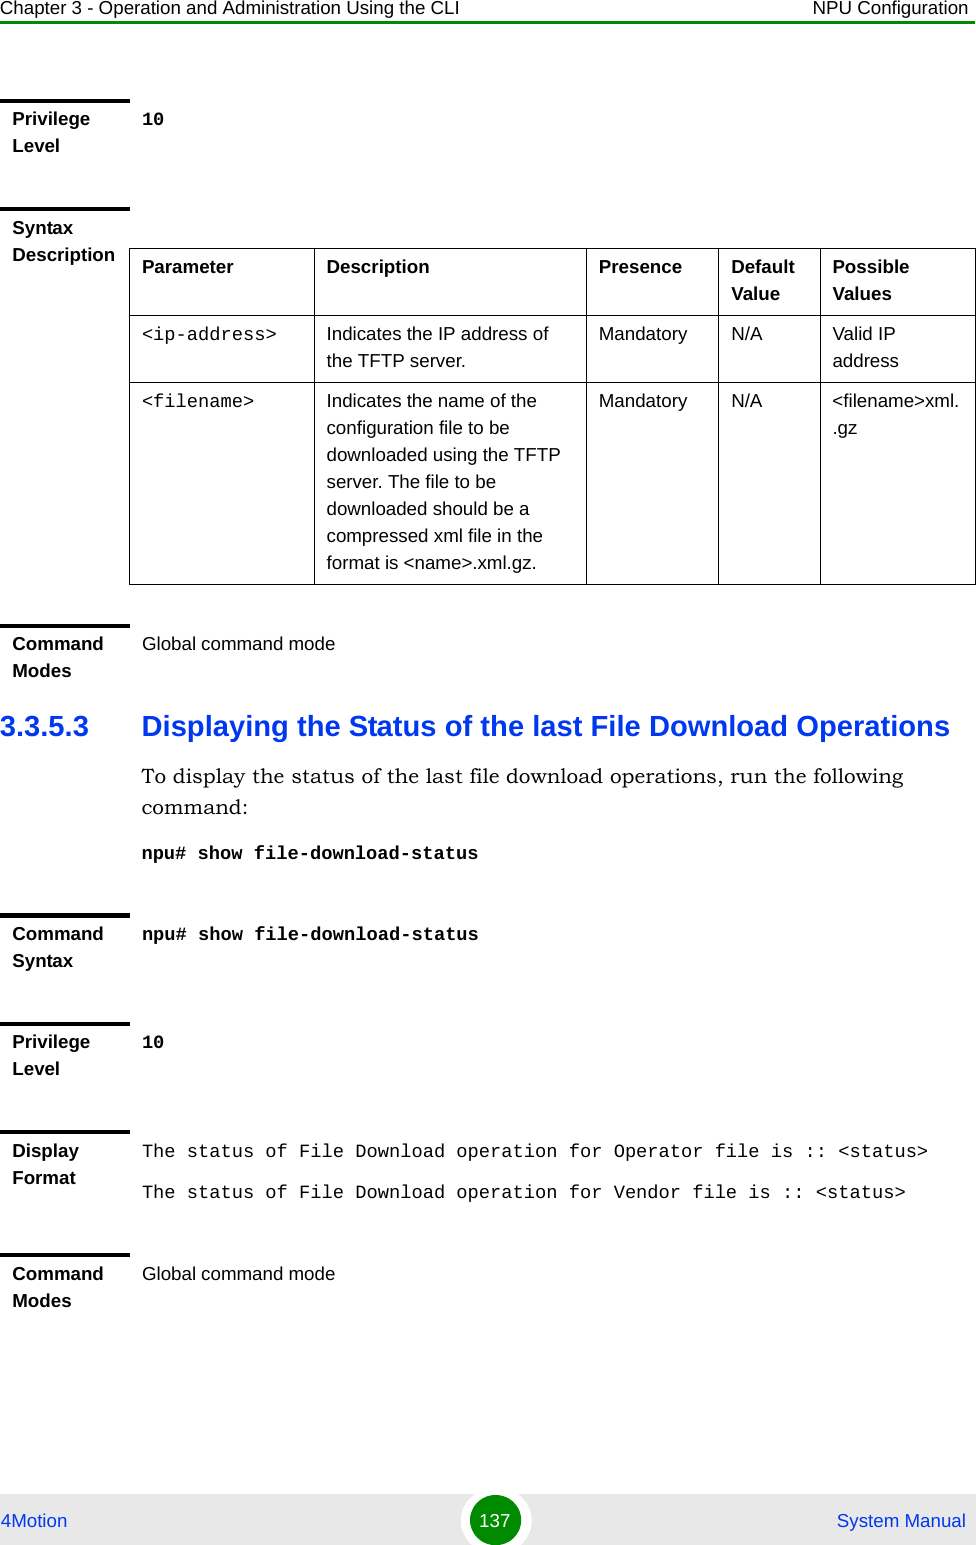 Chapter 3 - Operation and Administration Using the CLI NPU Configuration4Motion 137  System Manual3.3.5.3 Displaying the Status of the last File Download OperationsTo display the status of the last file download operations, run the following command:npu# show file-download-statusPrivilege Level10Syntax Description Parameter Description Presence Default ValuePossible Values&lt;ip-address&gt; Indicates the IP address of the TFTP server.Mandatory N/A Valid IP address&lt;filename&gt; Indicates the name of the configuration file to be downloaded using the TFTP server. The file to be downloaded should be a compressed xml file in the format is &lt;name&gt;.xml.gz.Mandatory N/A &lt;filename&gt;xml..gzCommand ModesGlobal command modeCommand Syntaxnpu# show file-download-statusPrivilege Level10Display FormatThe status of File Download operation for Operator file is :: &lt;status&gt;The status of File Download operation for Vendor file is :: &lt;status&gt; Command ModesGlobal command mode